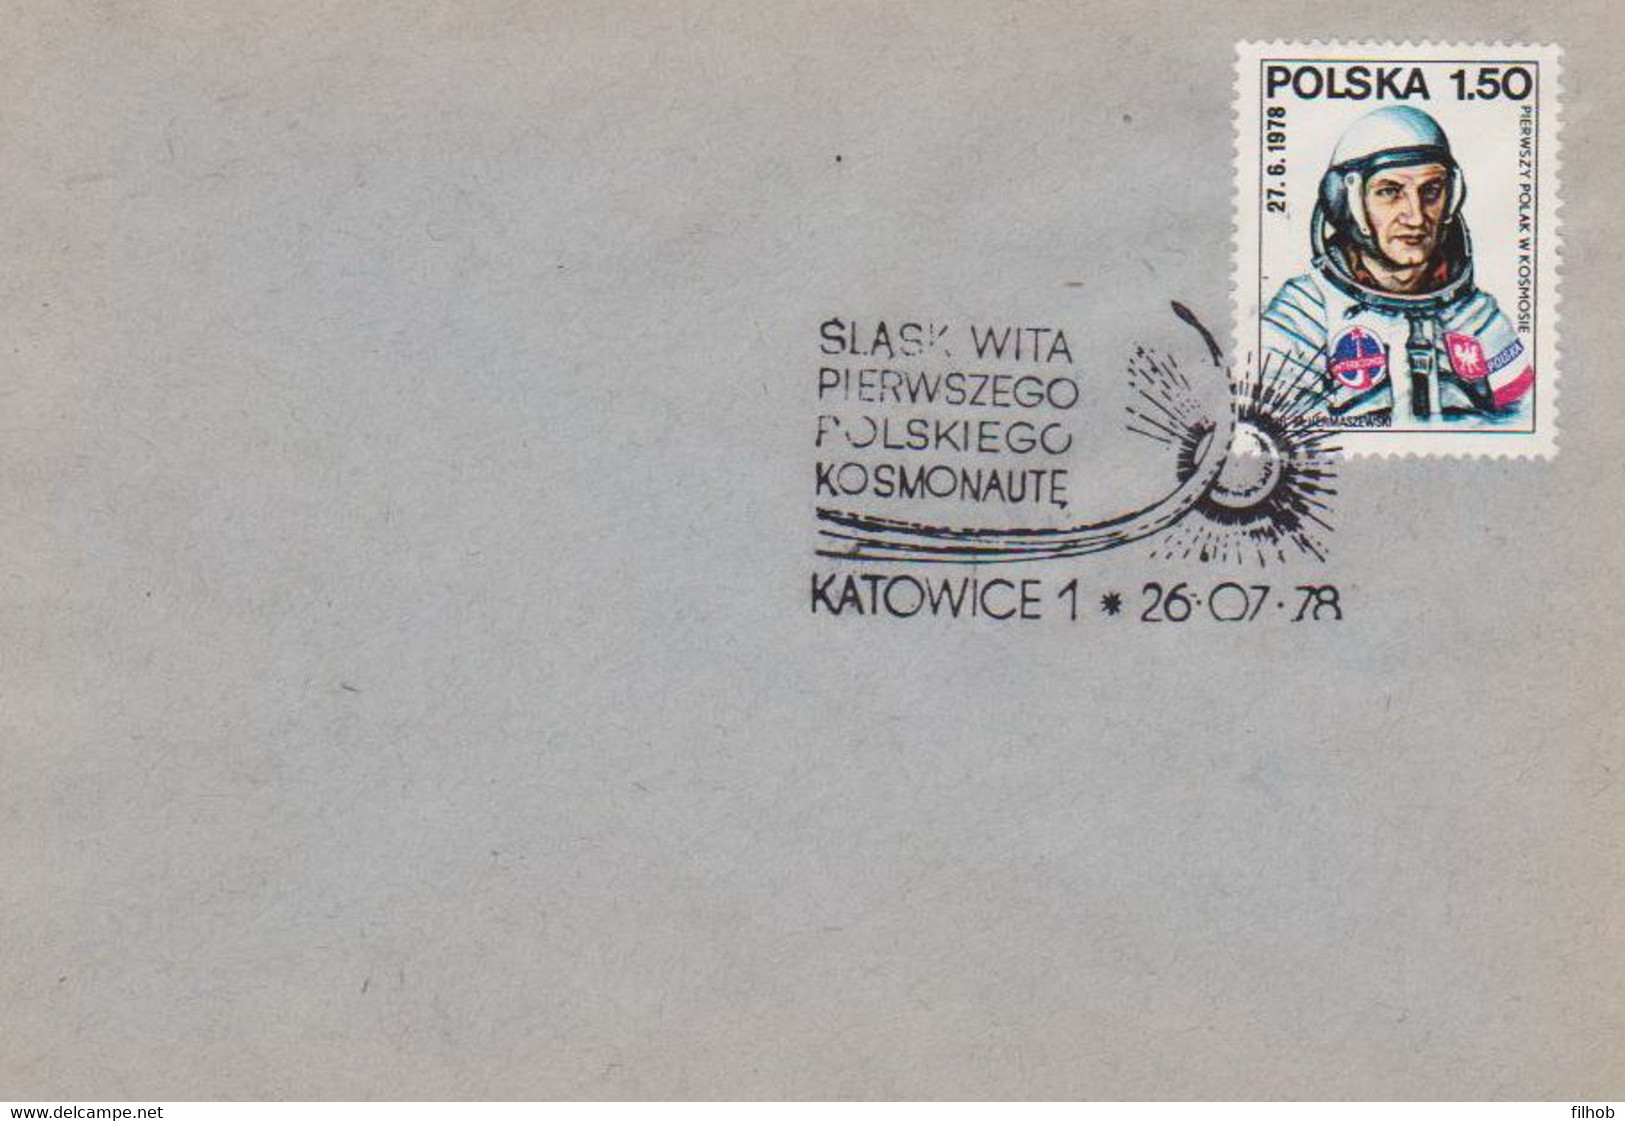 Poland Postmark D78.07.26 KATOWICE.03kop: Cosmos The First Polish Cosmonaut Sun - Stamped Stationery